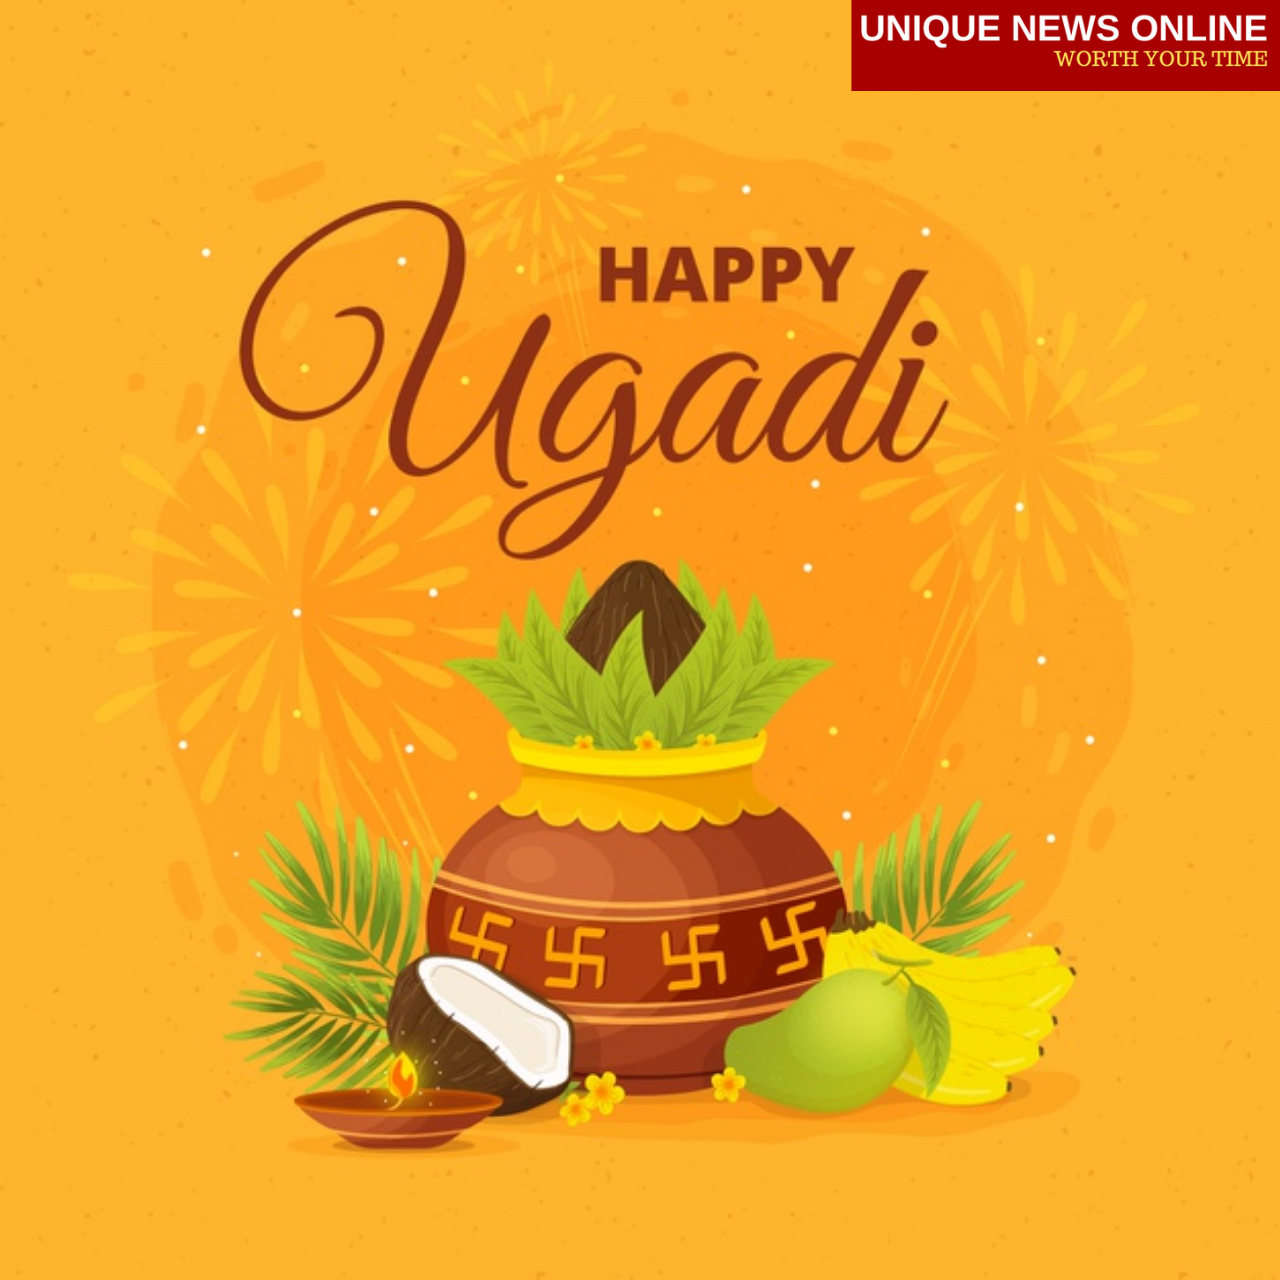 Happy Ugadi 2021 Wishes in Telugu, Images, Greetings, Quotes, and